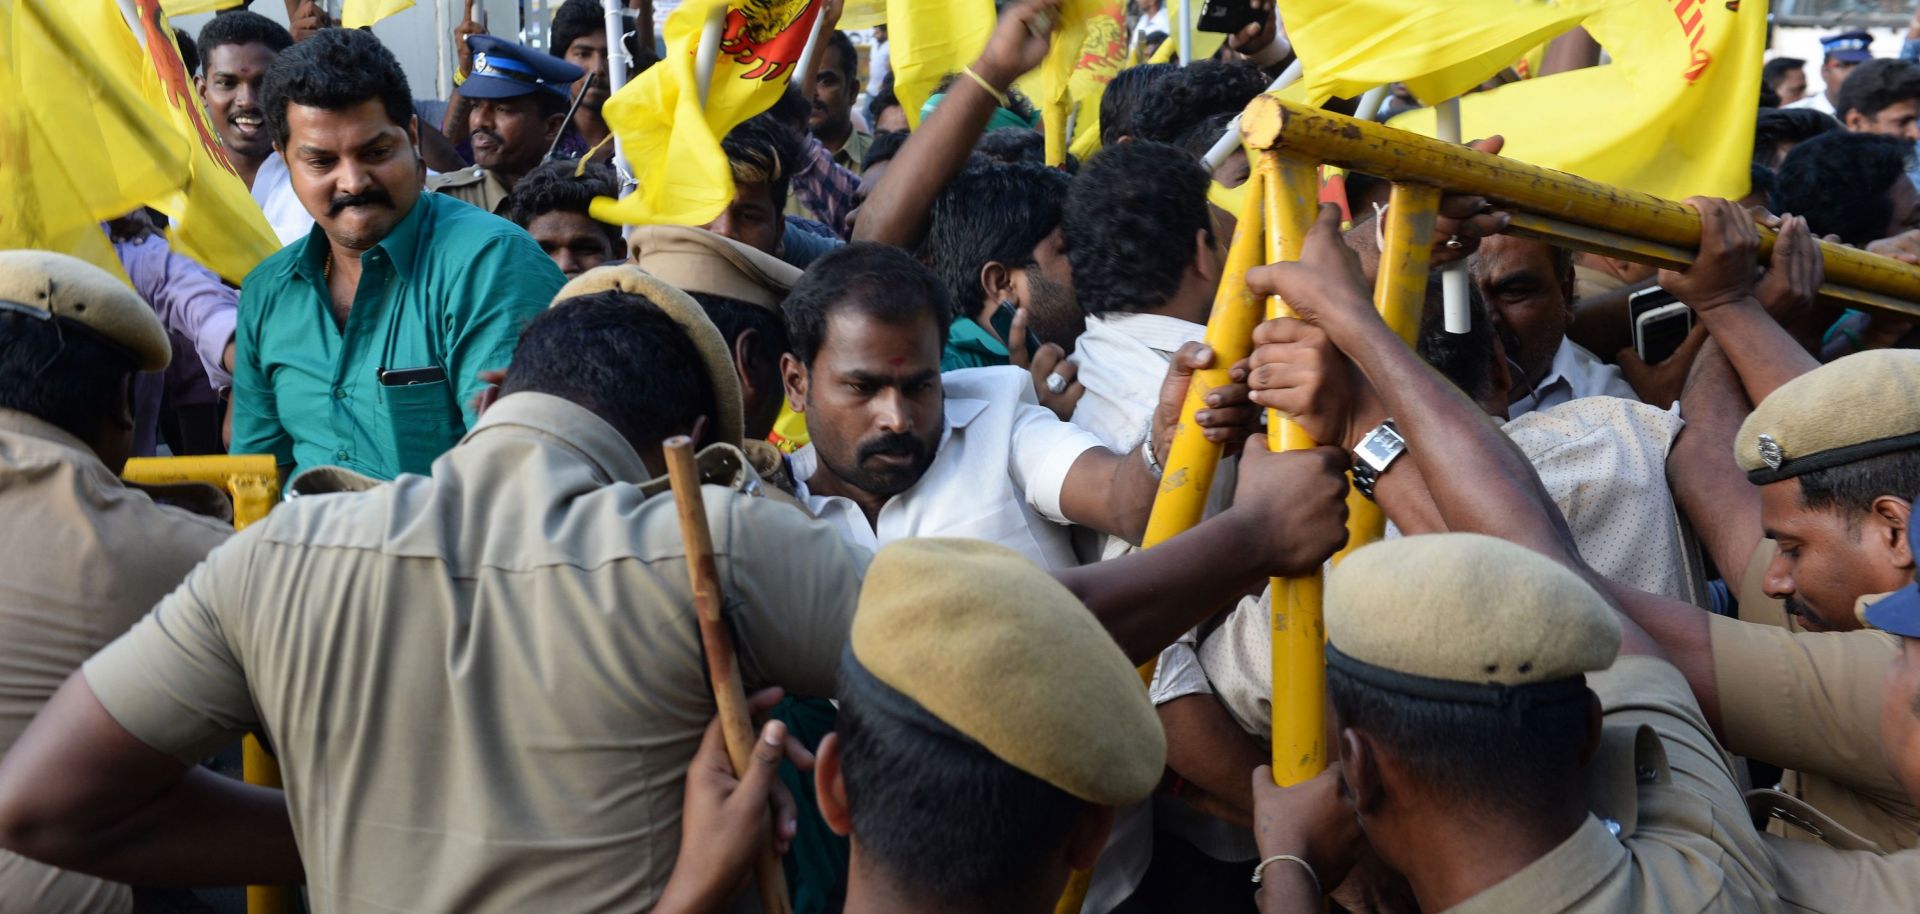 Protesters angry over water management took their grievances to the Chennai Super Kings home stadium.